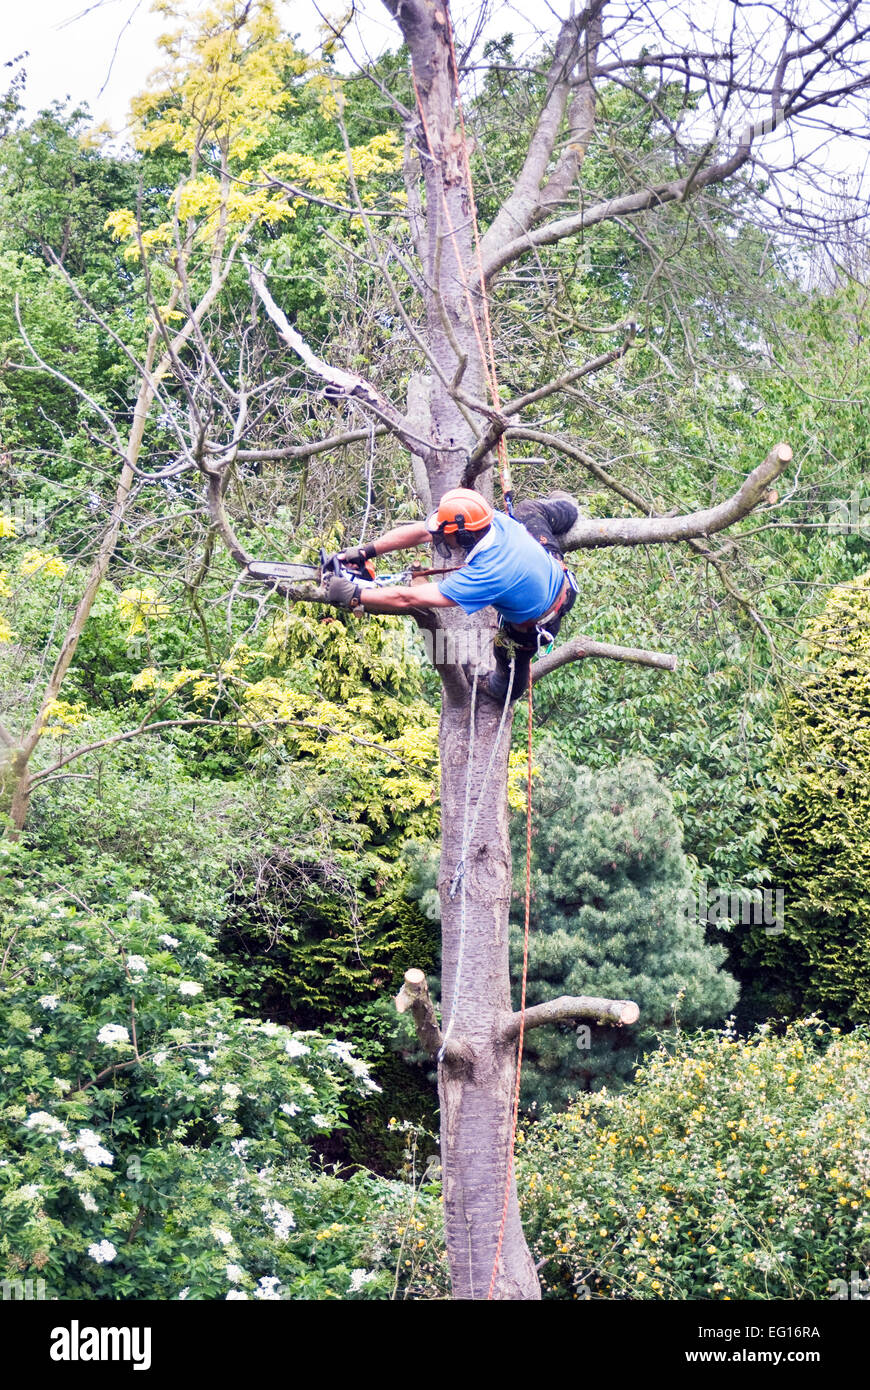 tree surgeon removing branches from a dead tree Stock Photo